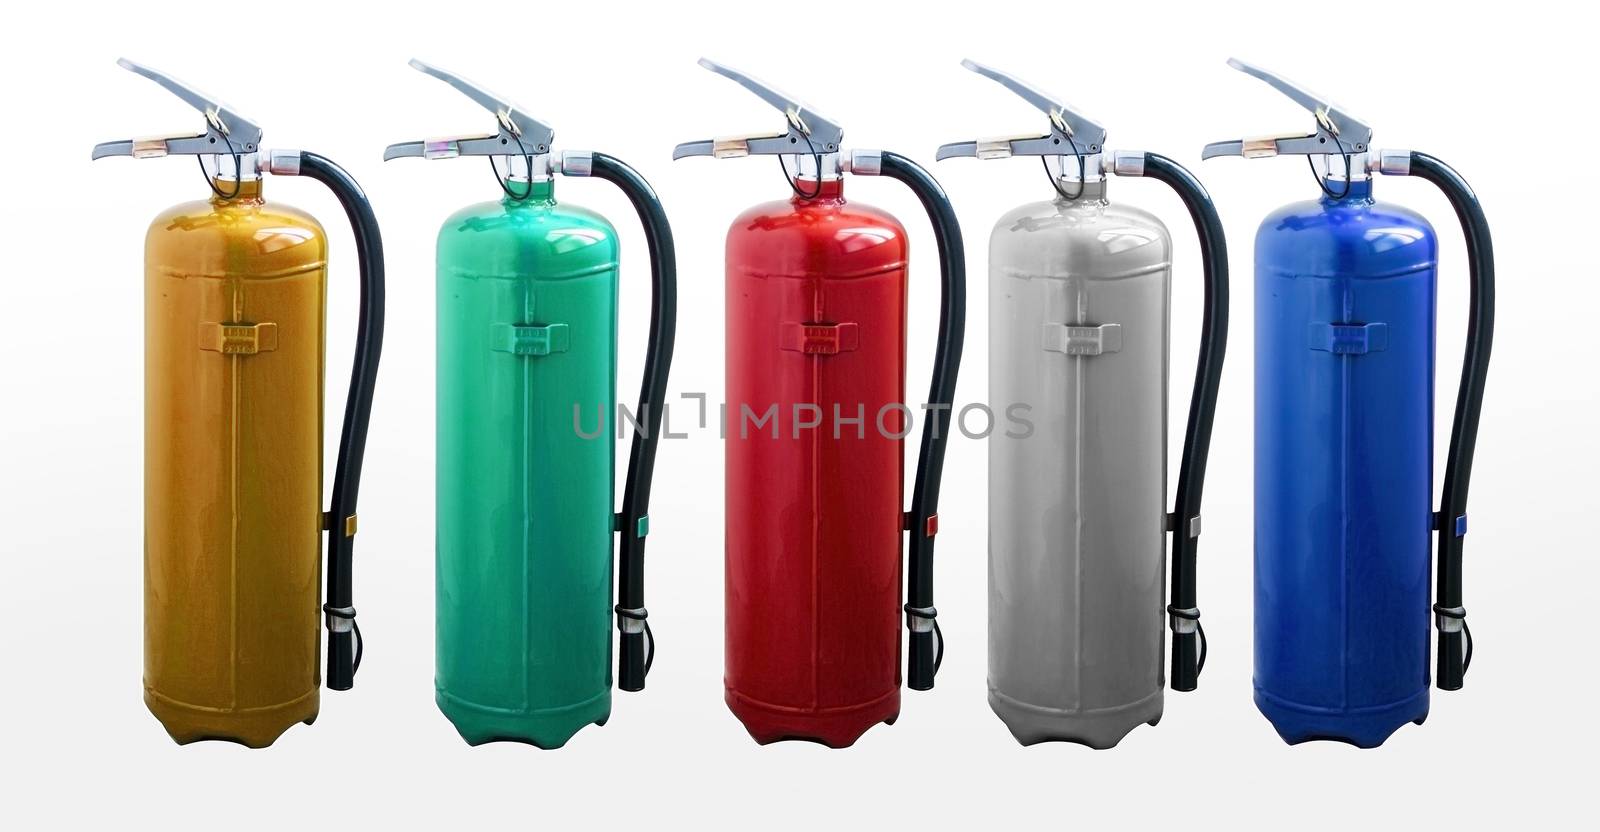 Portable colorful fire extinguisher by yanukit